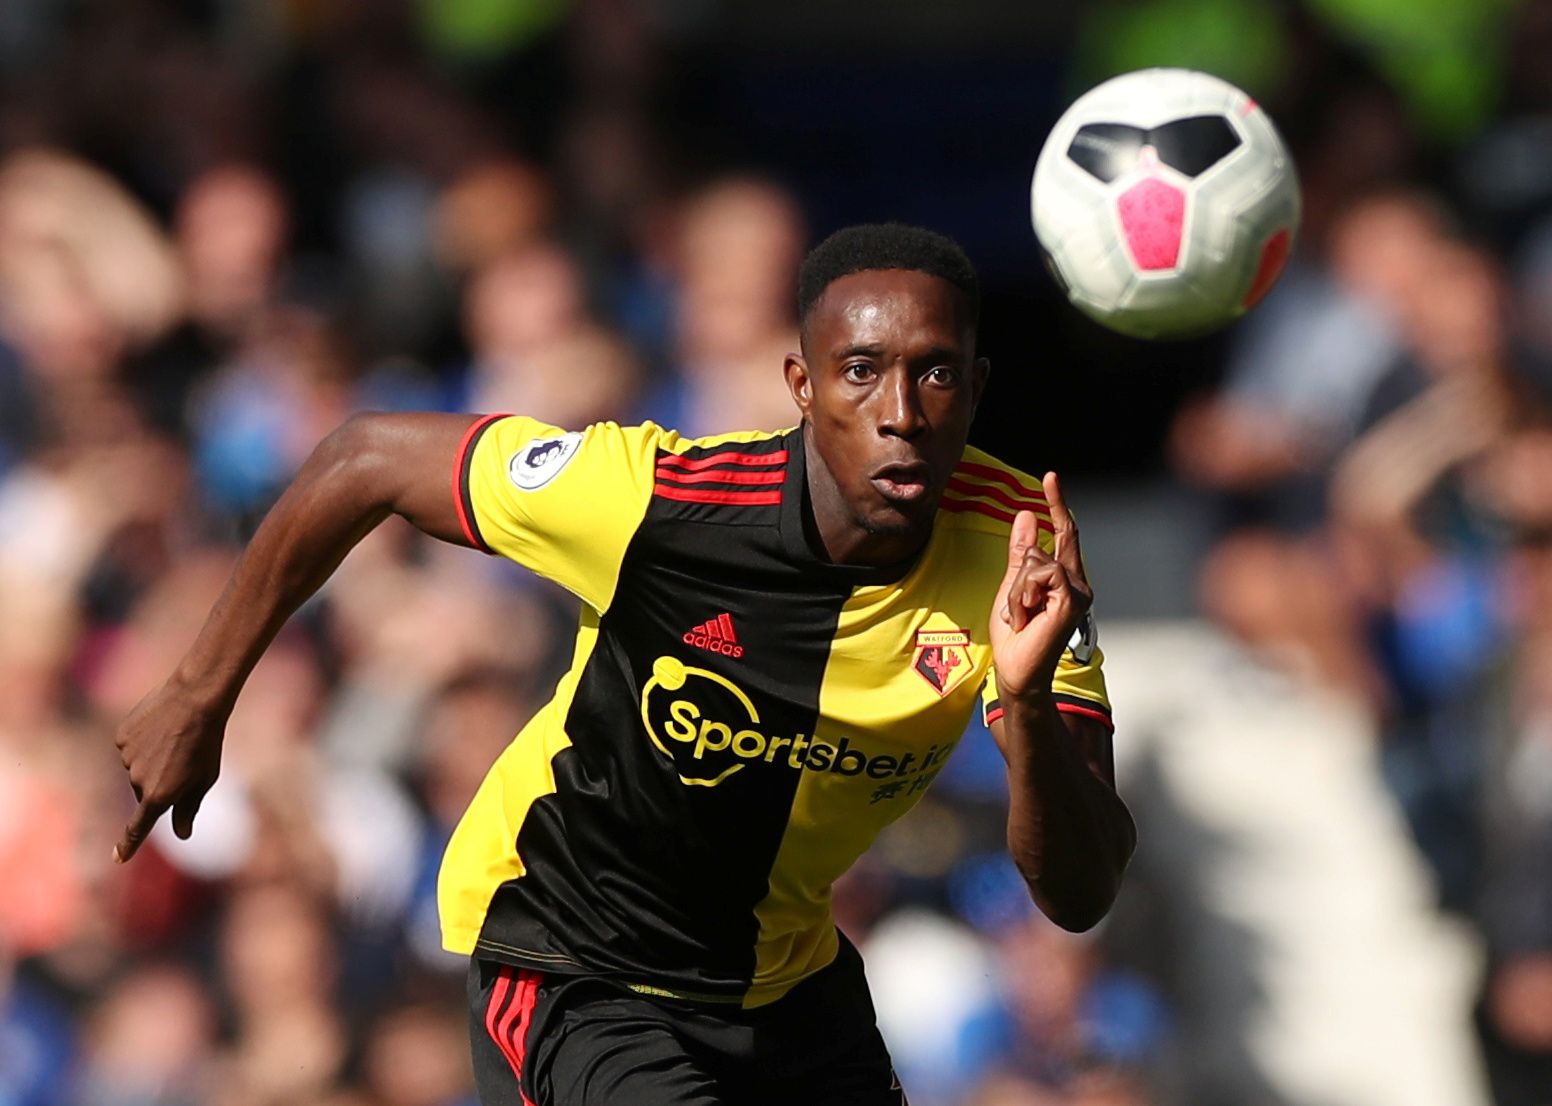 Soccer Football - Premier League - Everton v Watford - Goodison Park, Liverpool, Britain - August 17, 2019  Watford's Danny Welbeck in action  Action Images via Reuters/Lee Smith  EDITORIAL USE ONLY. No use with unauthorized audio, video, data, fixture lists, club/league logos or 